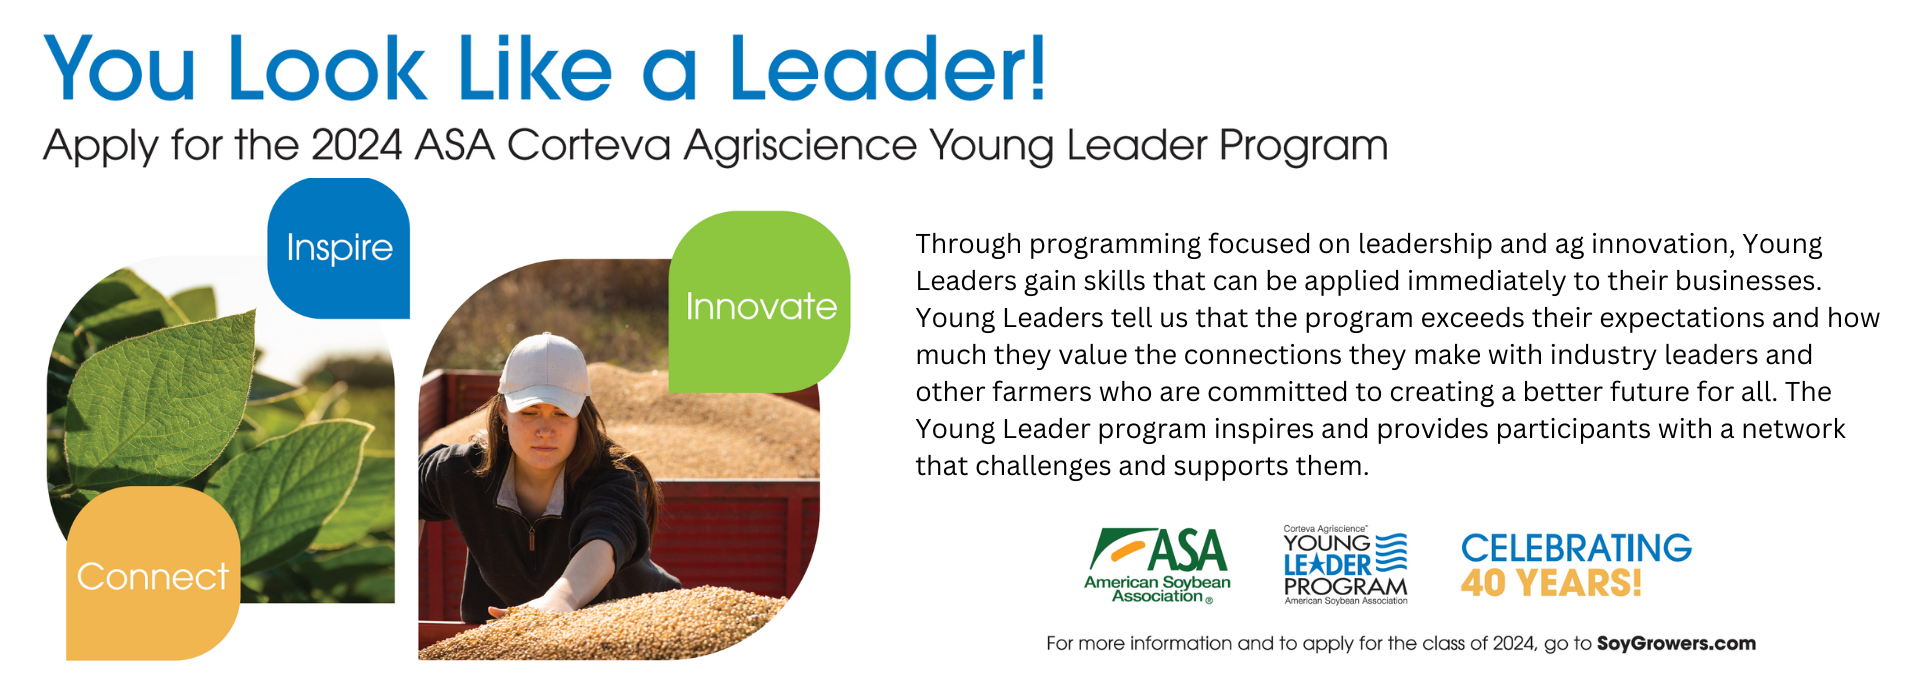 Corteva Agriscience and American Soybean Association Young Leader Program